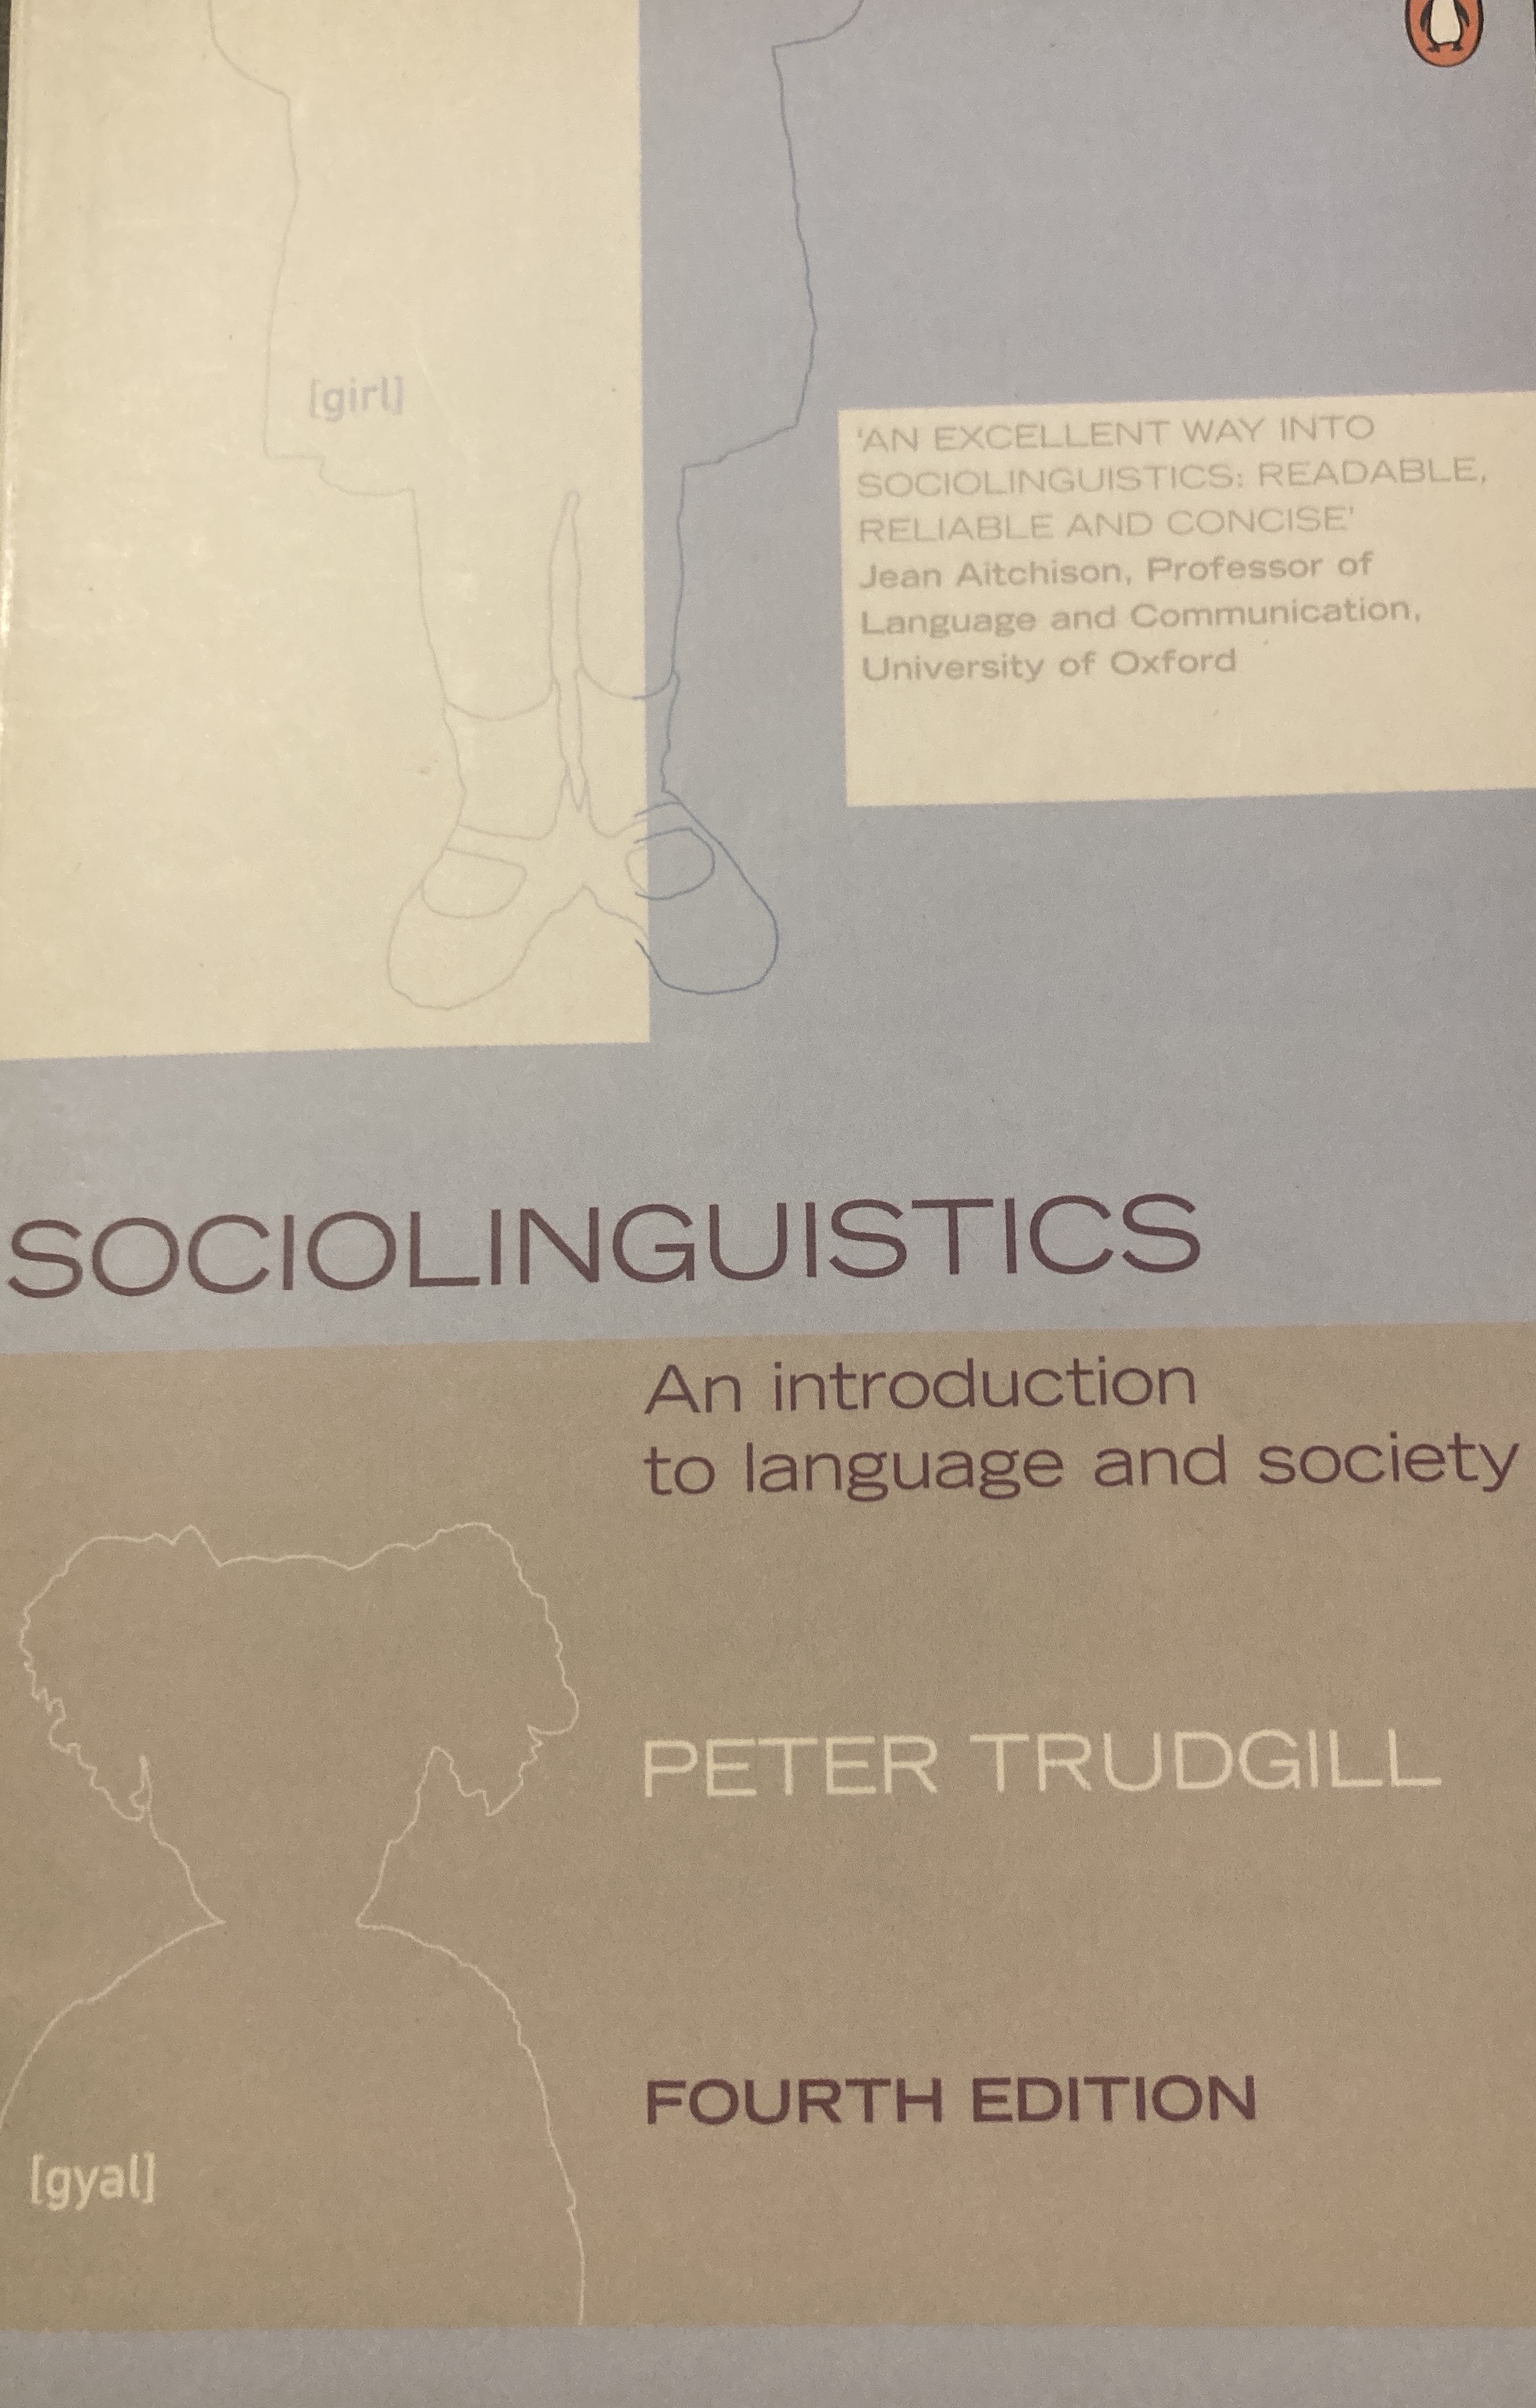 Sociolinguistics. An introduktion to language and society; Peter Trudgill; 2000